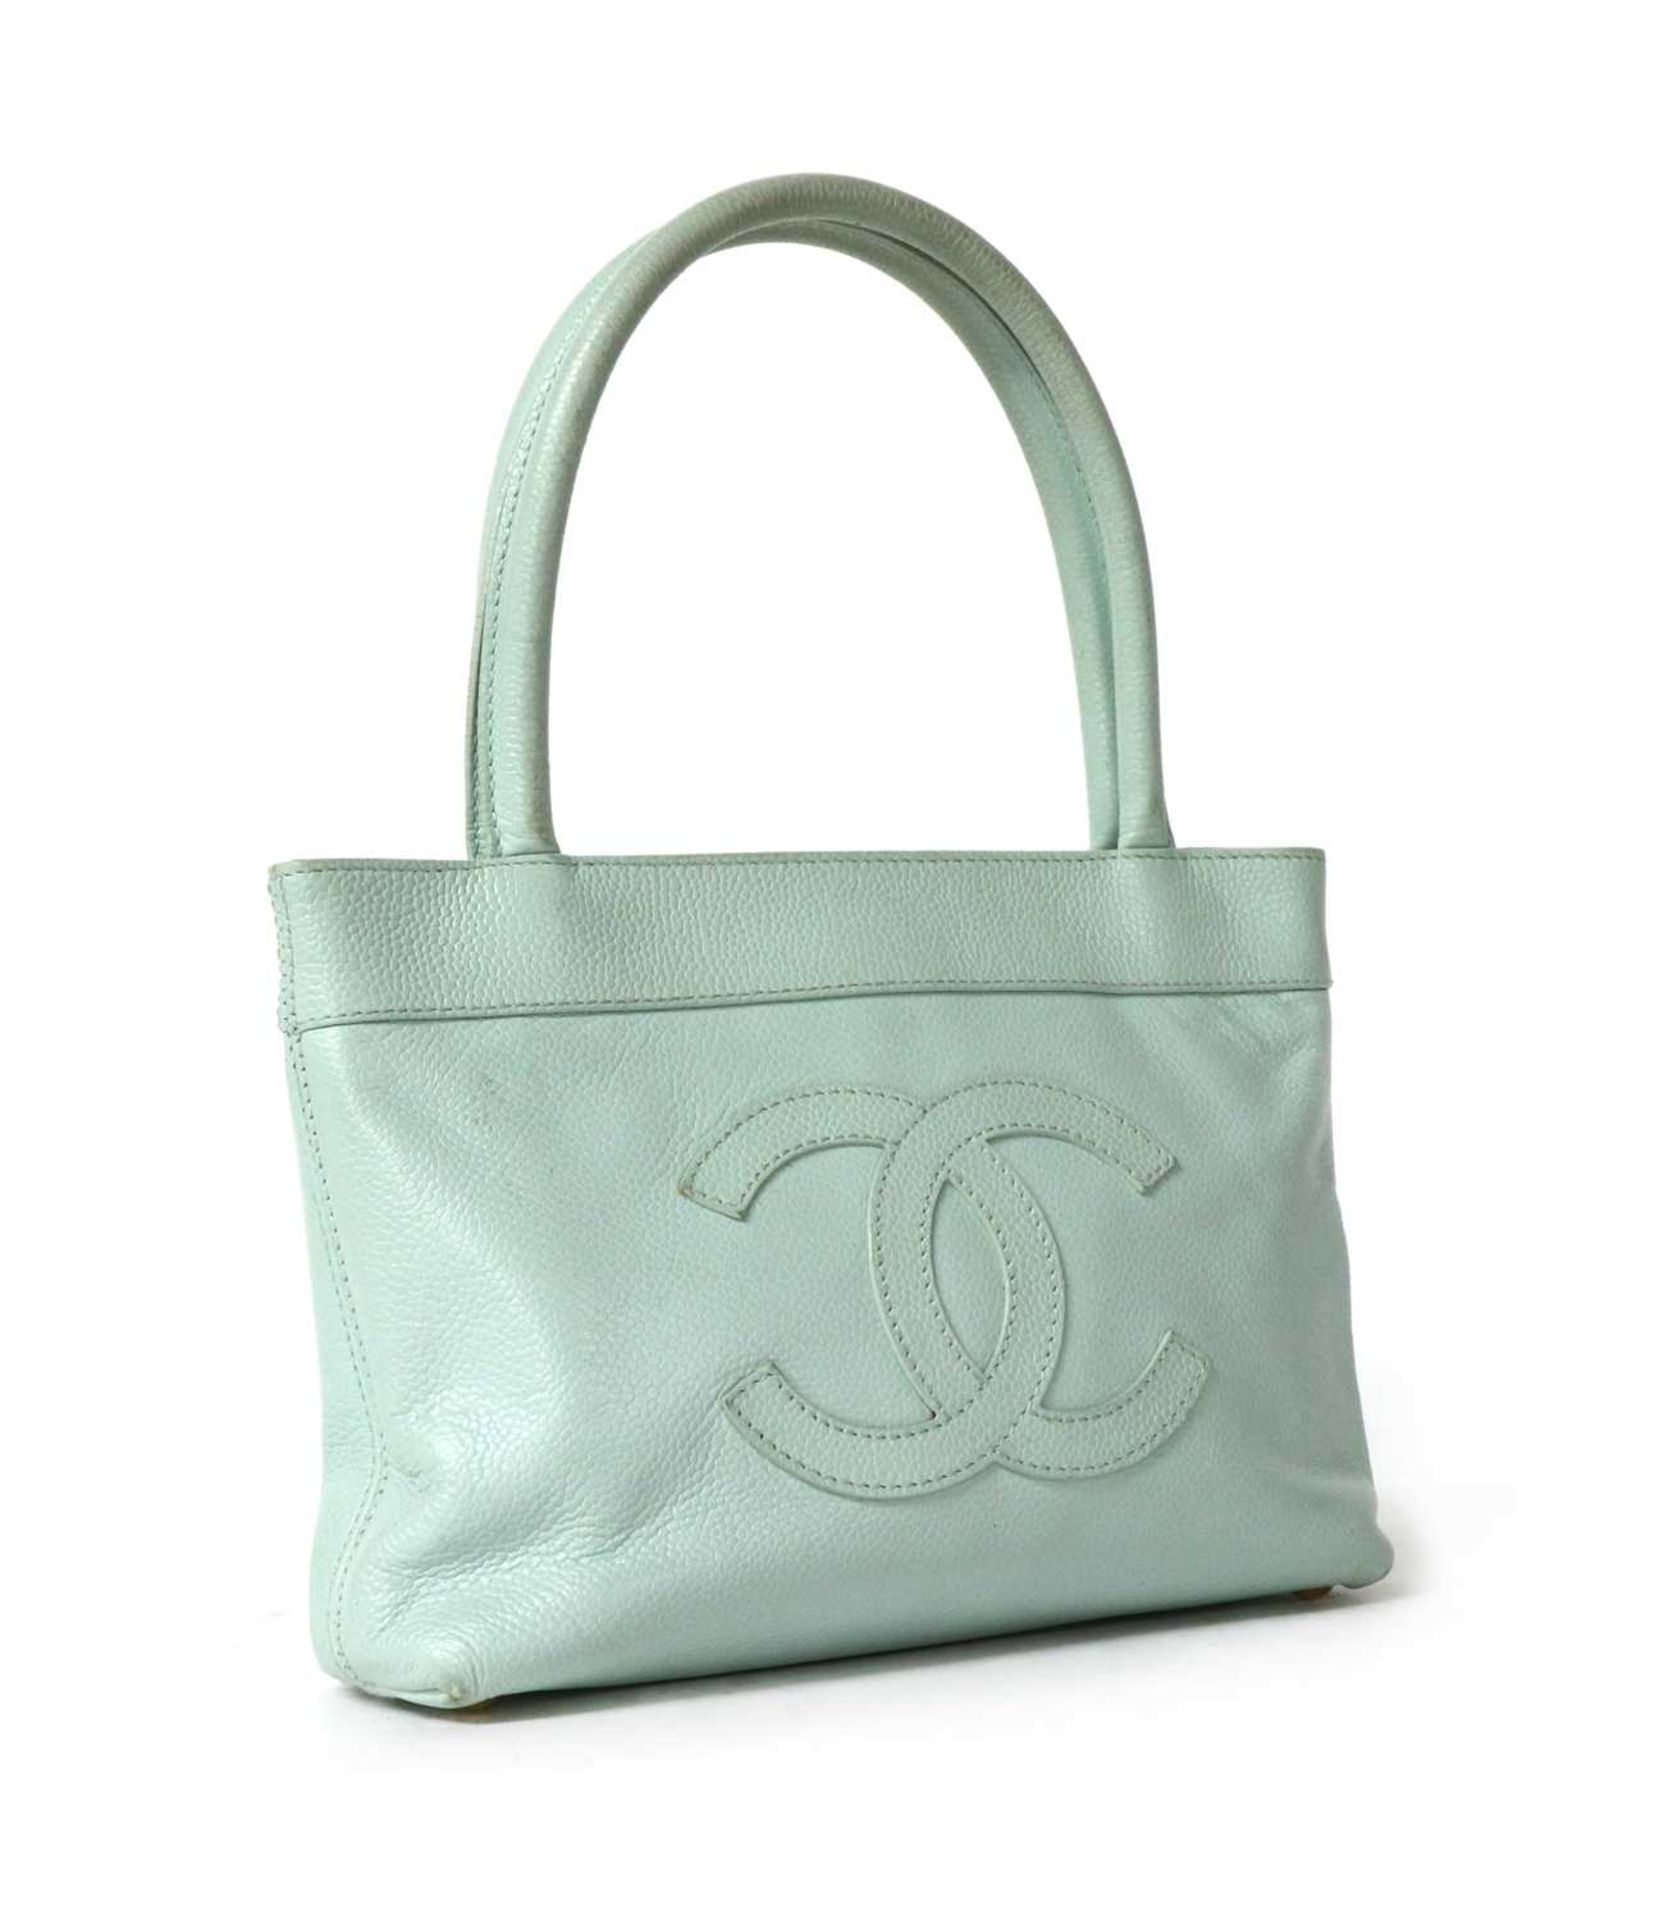 A Chanel baby blue leather small Monte Carlo tote